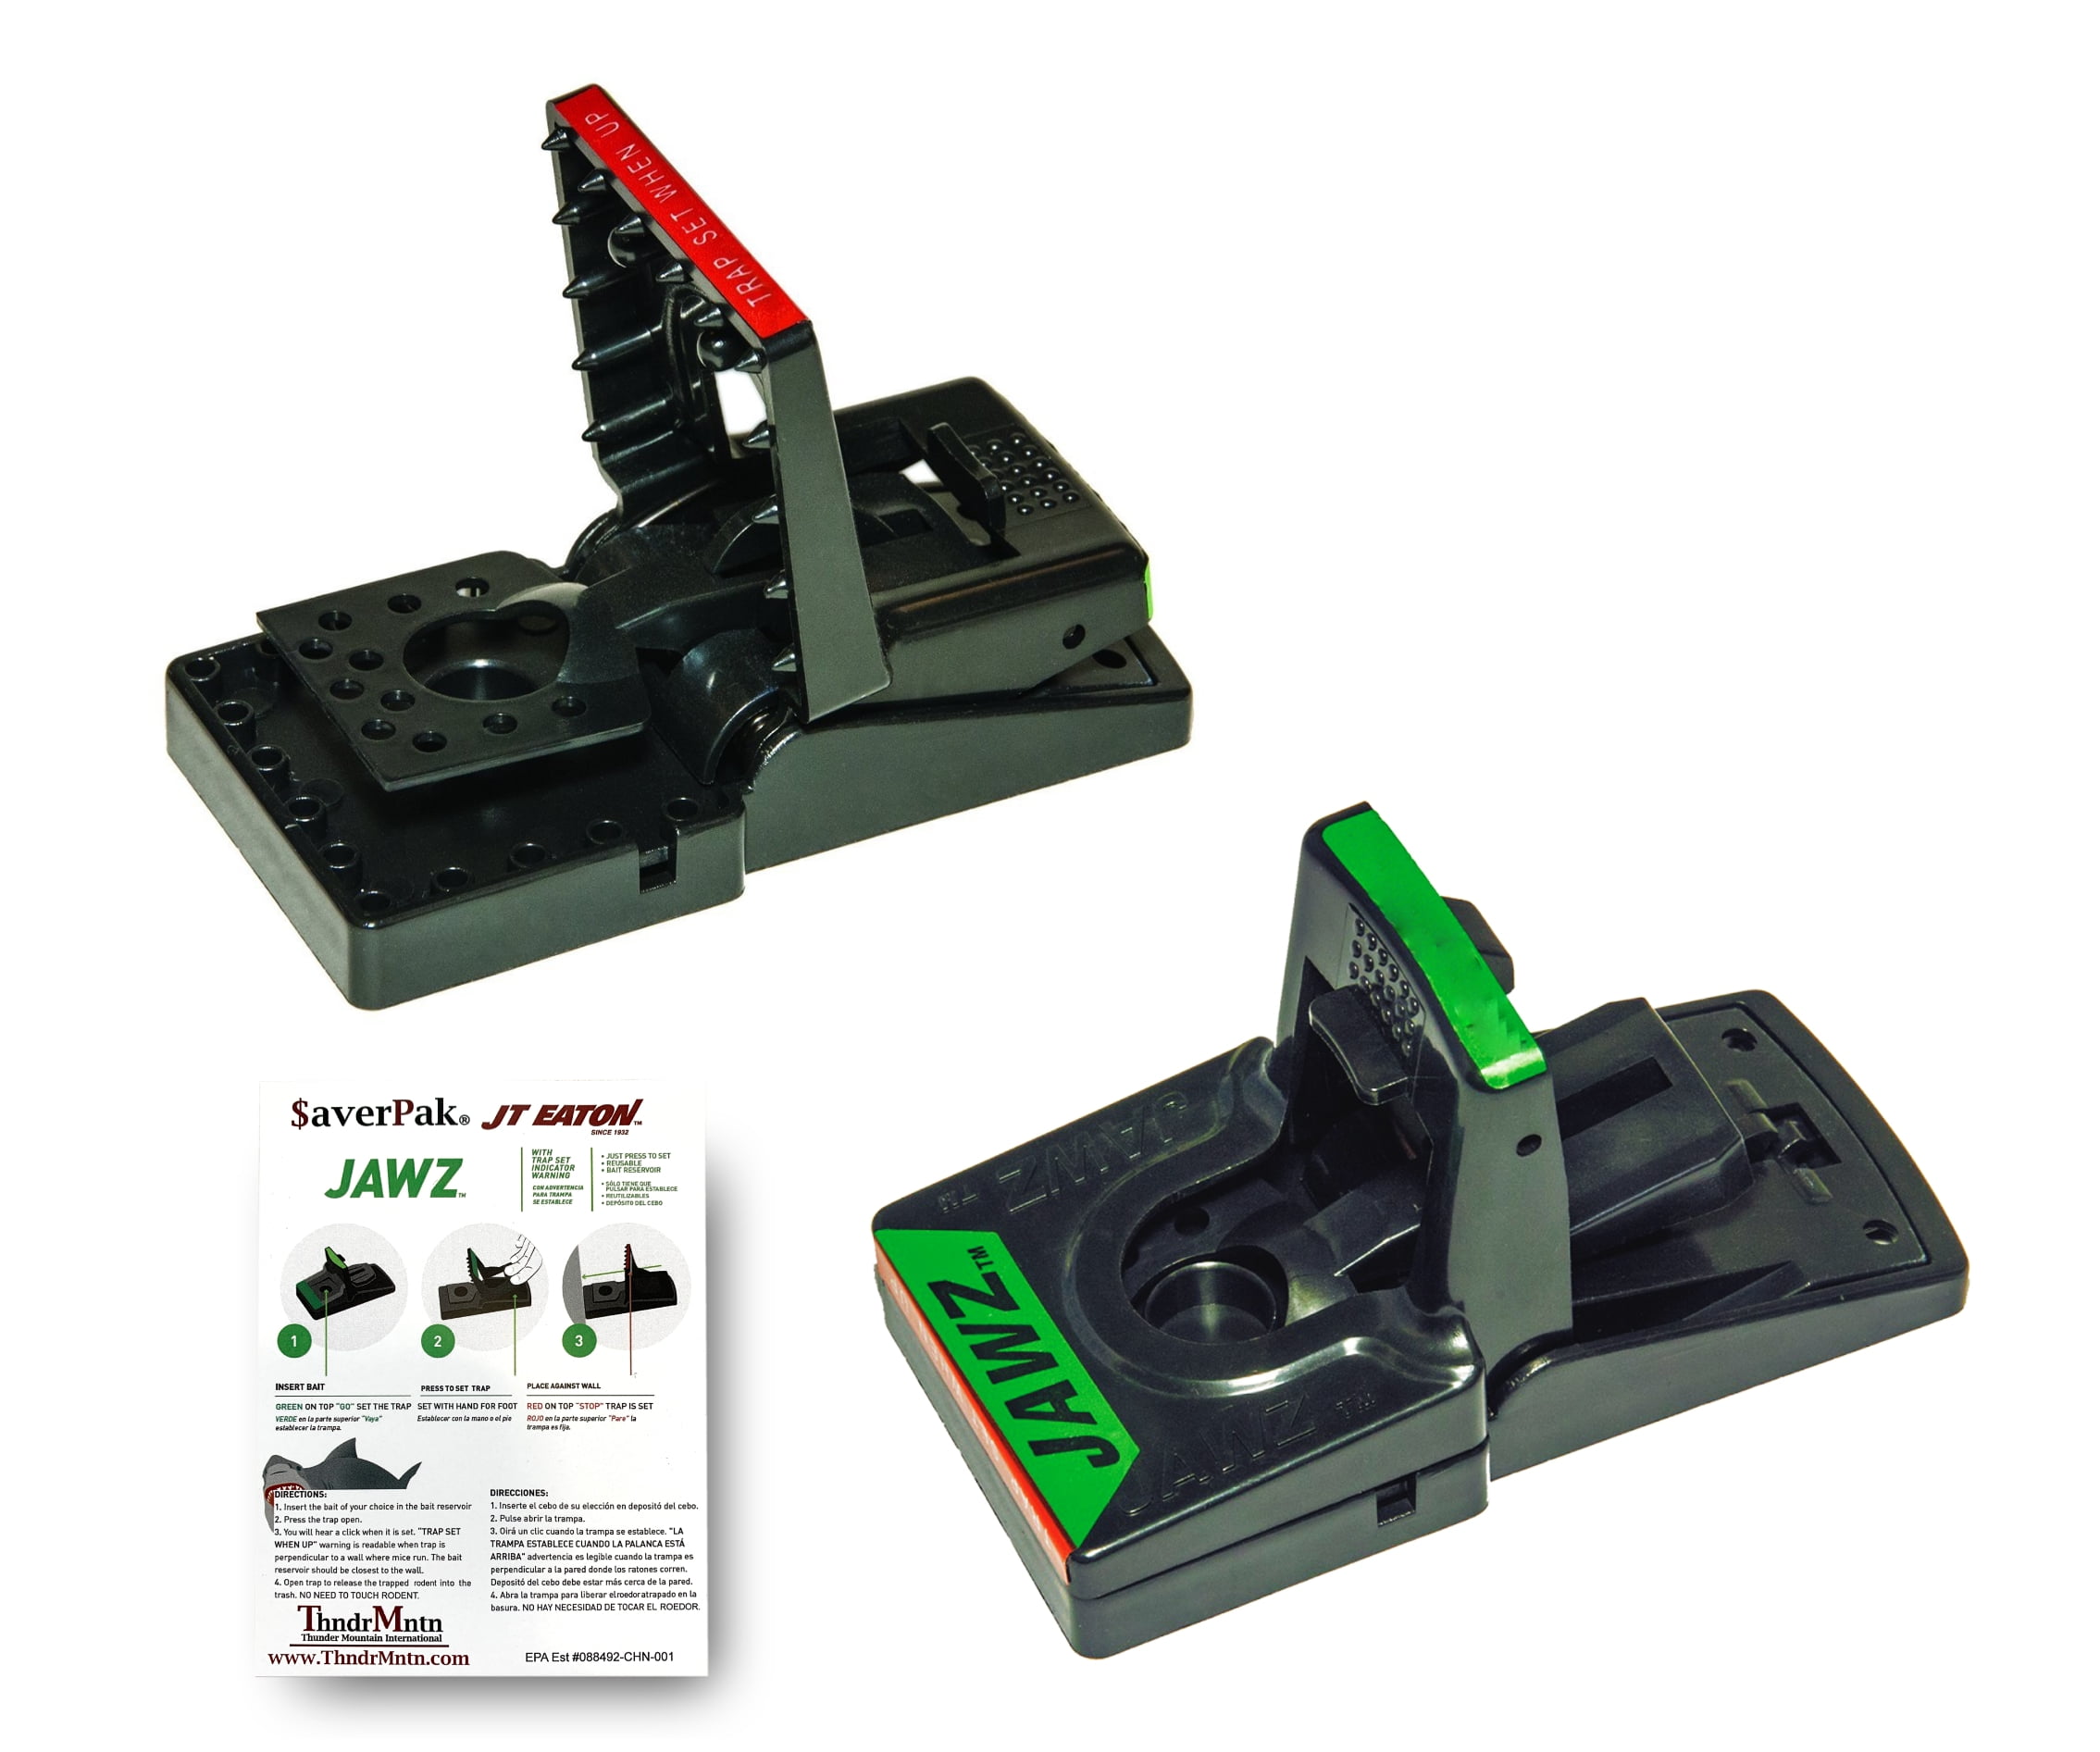 $averPak Single - Includes 1 JT Eaton Jawz Rat and Chipmunk Trap for use  with Solid or Liquid Baits